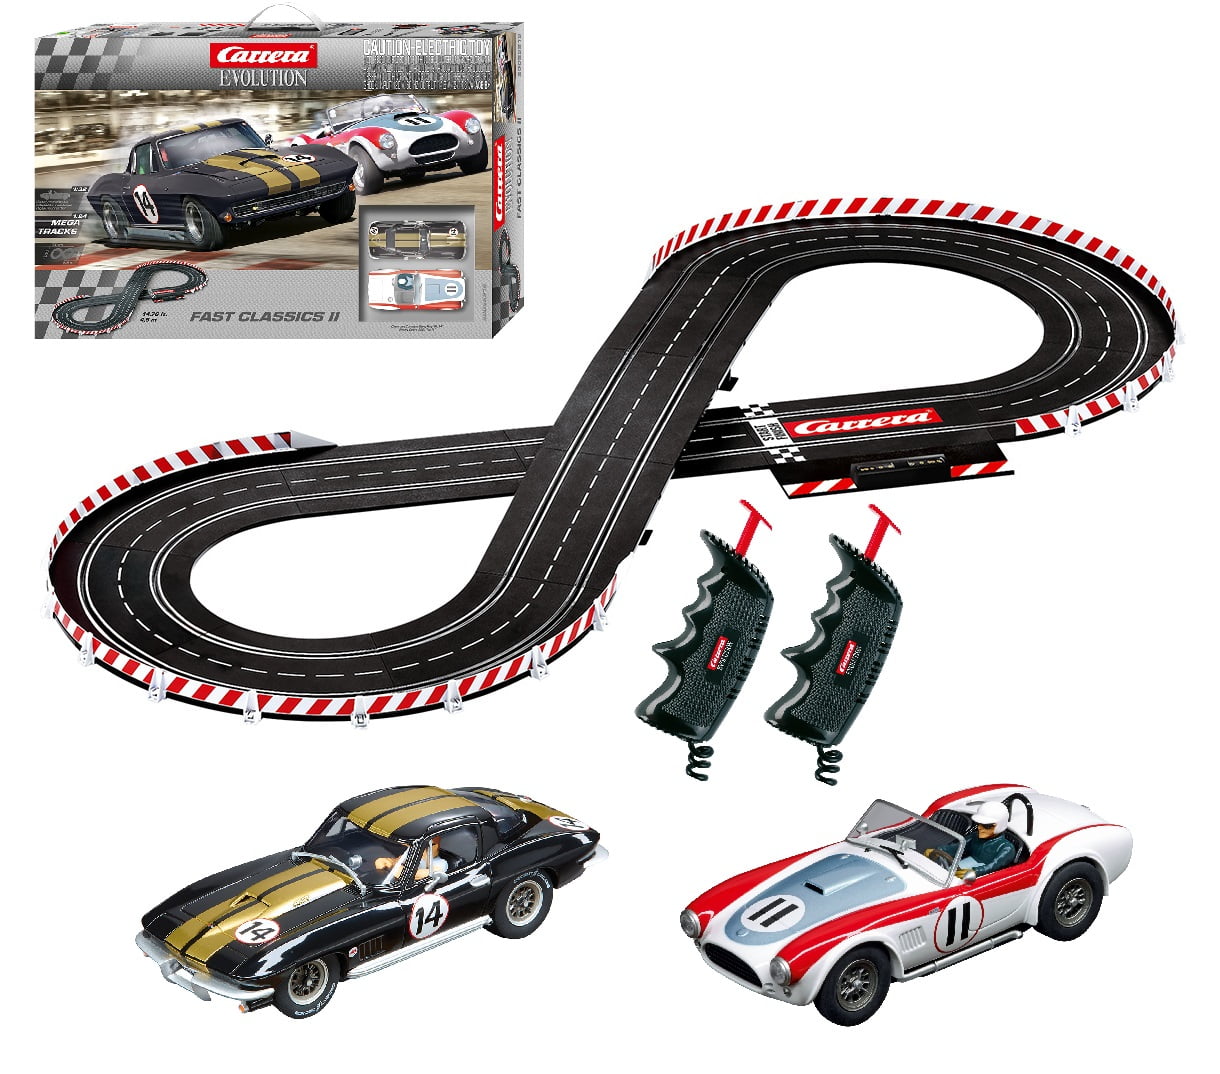 Carrera Evolution 25215 Fast Classics II Electric Analog Slot Car Race Track  Set featuring 1:32 Scale Vehicles - Shelby Cobra versus Chevrolet Corvette  Sting Ray 